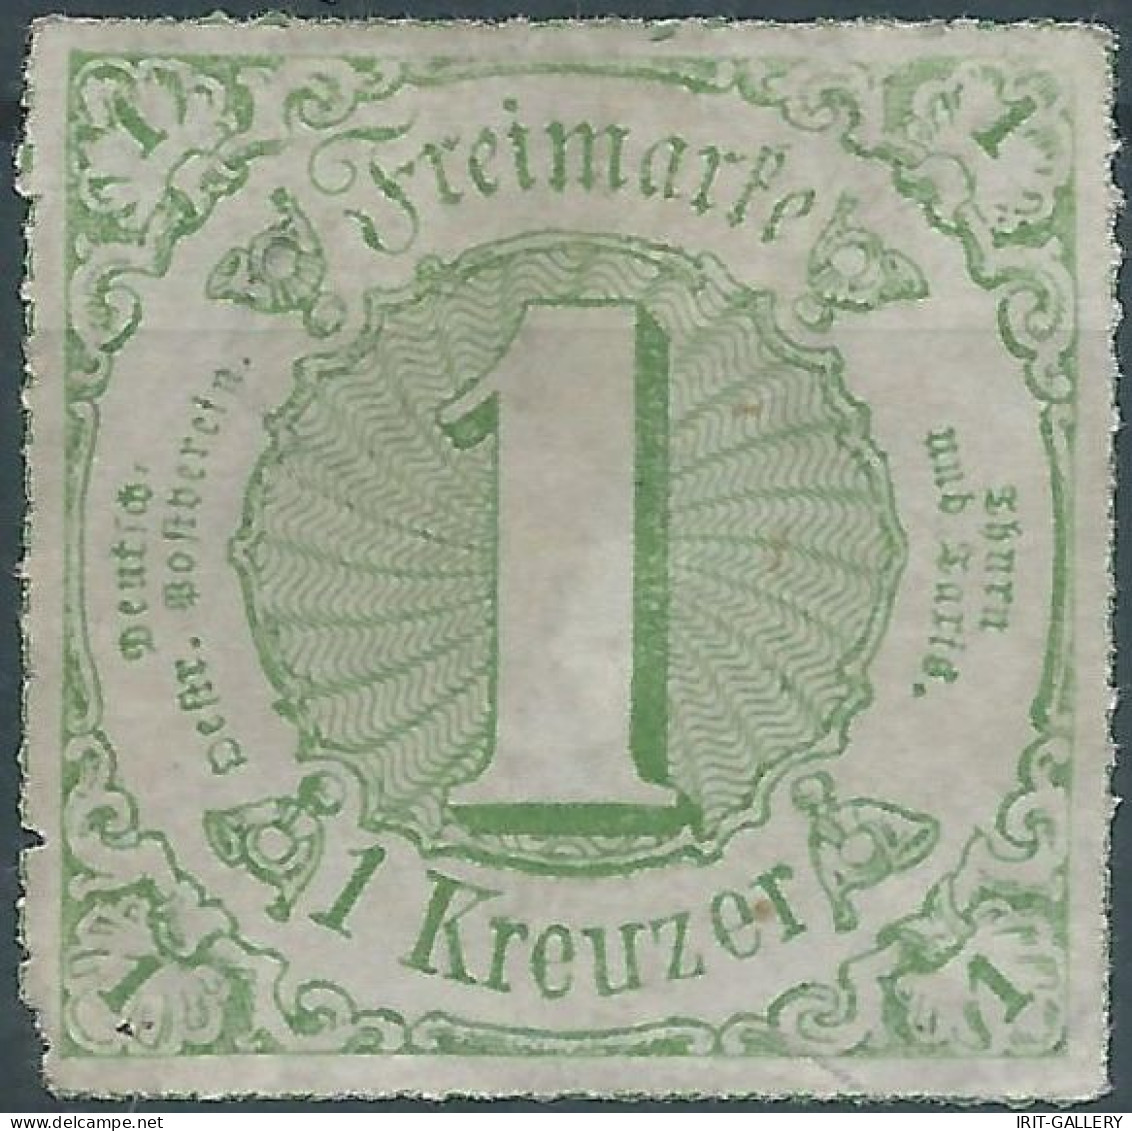 Germania-Germany-Deutschland,Taxis,1865 Colored Print On White Paper-Rouletted Perforation, 1Kr,Mint,Value:€15,00 - Neufs